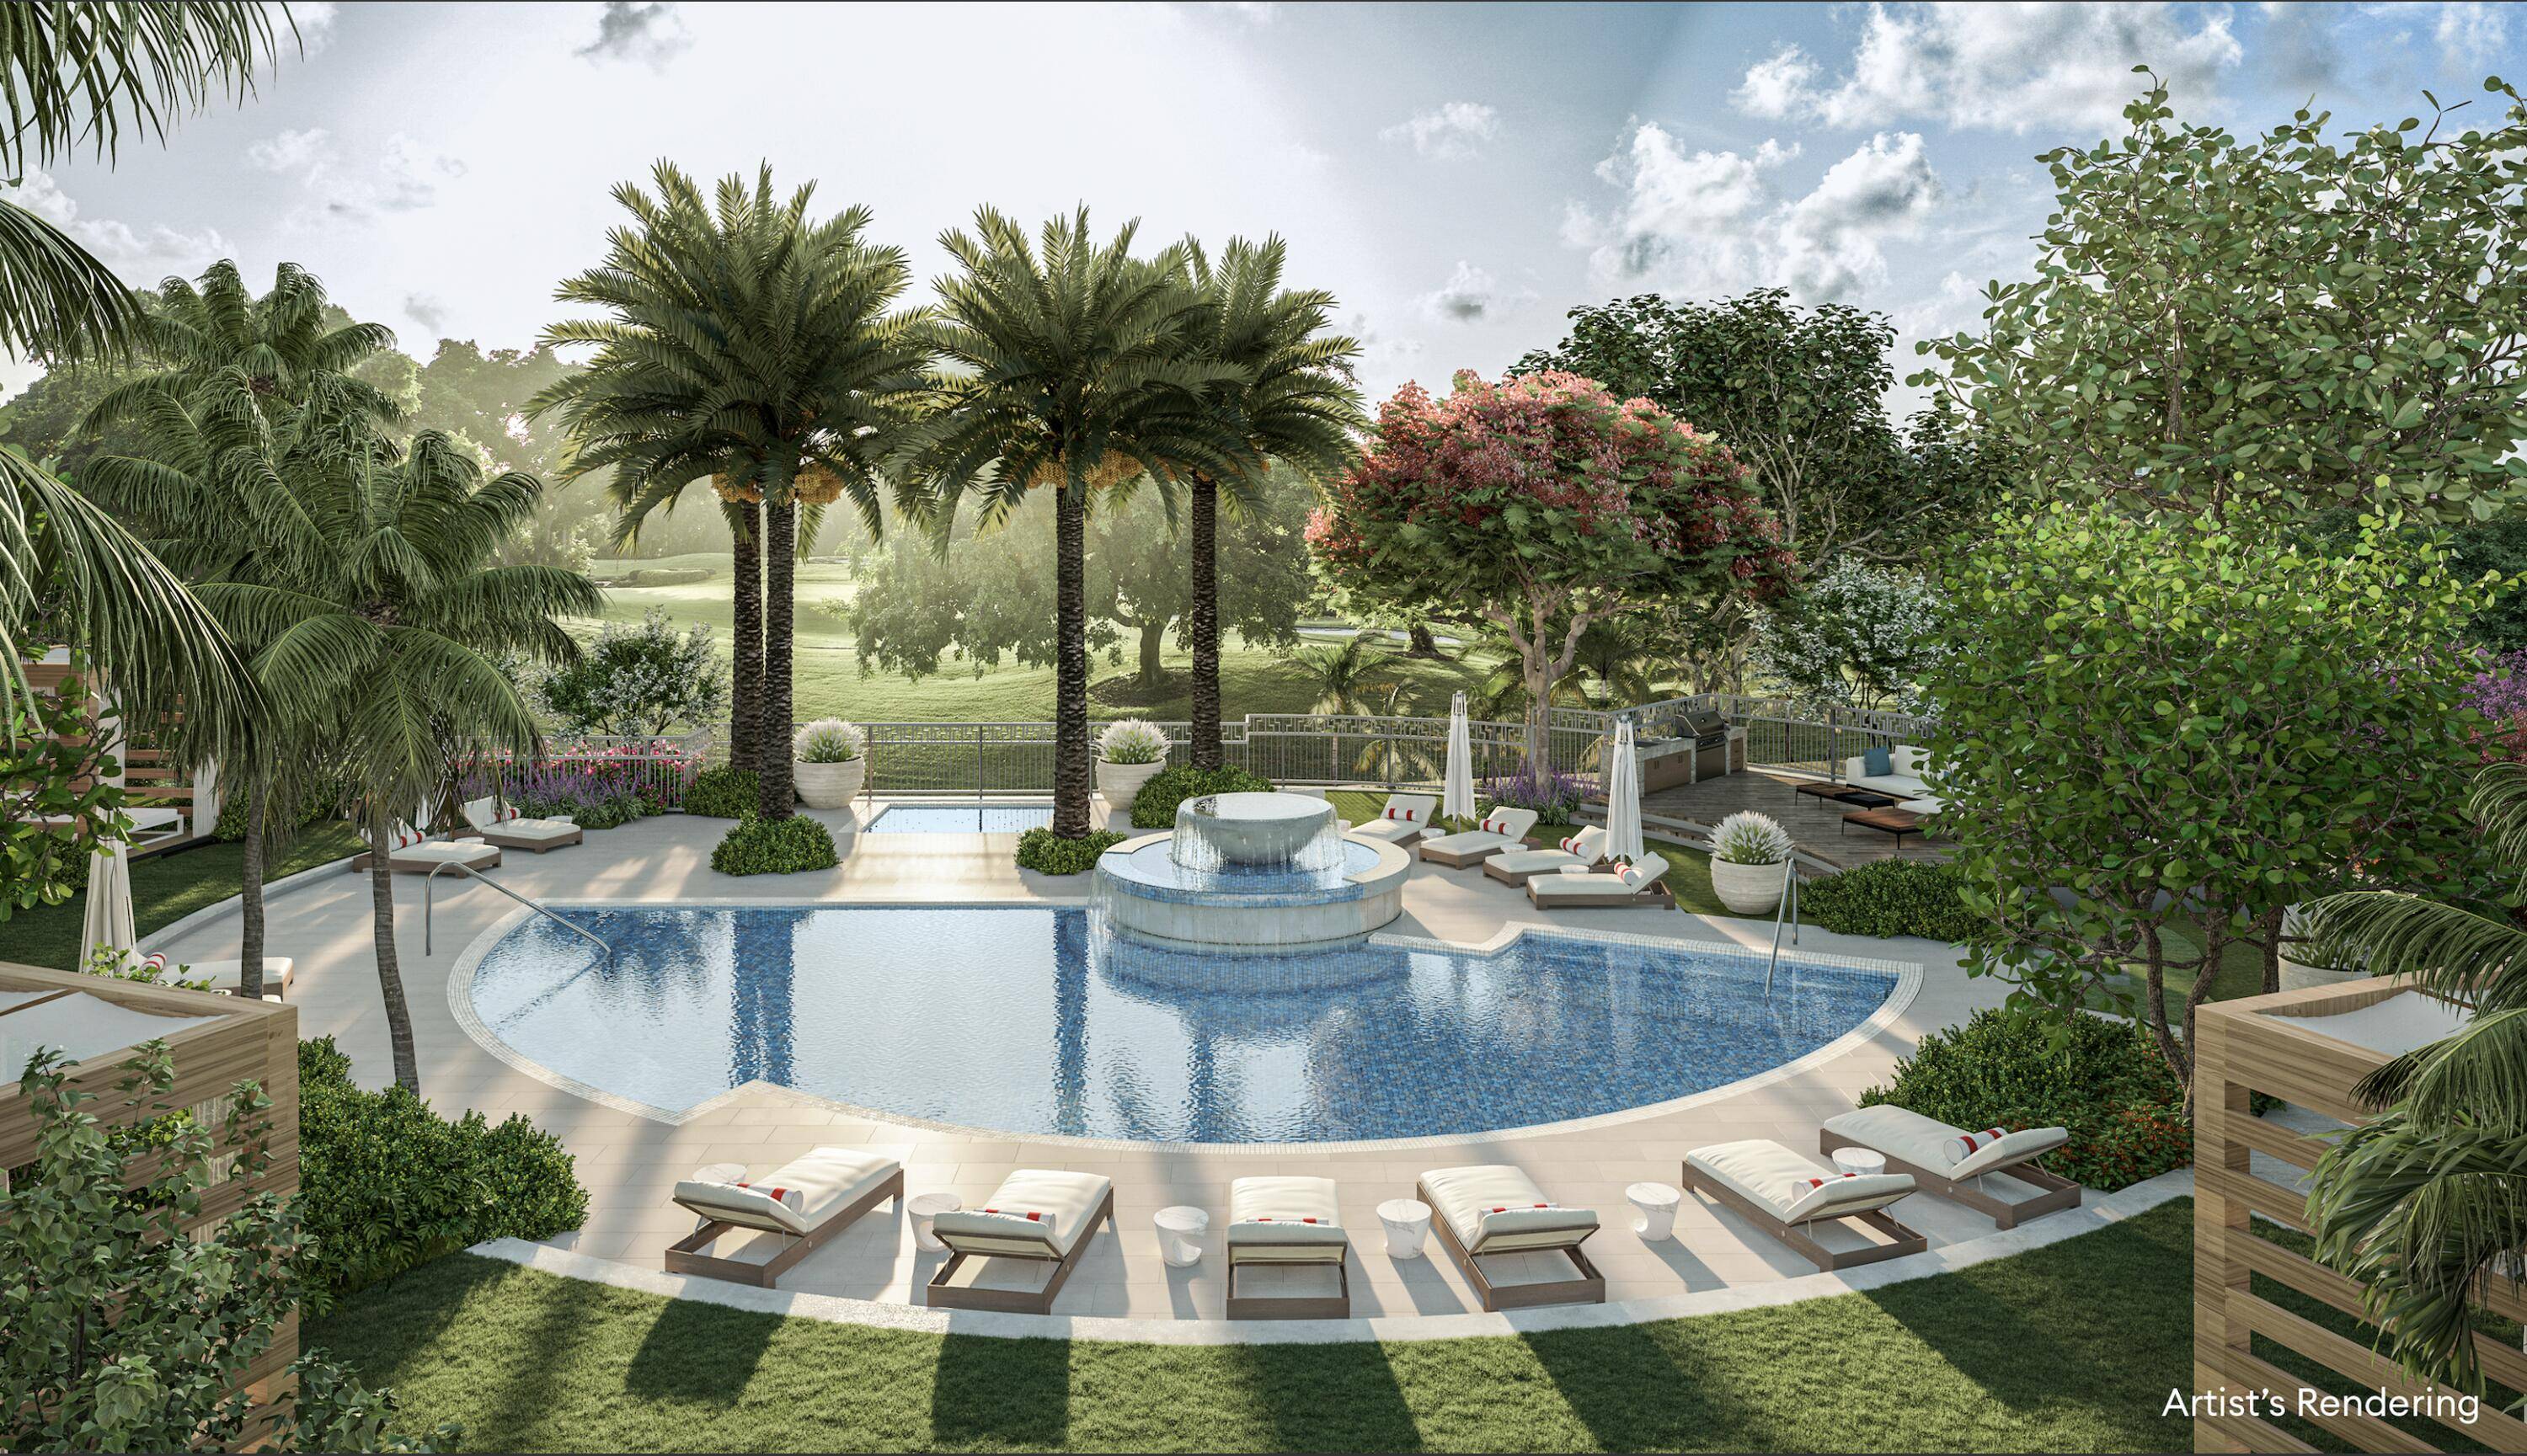 Your most exclusive downtown Boca Raton luxury pre construction opportunity has arrived ALINA 210.